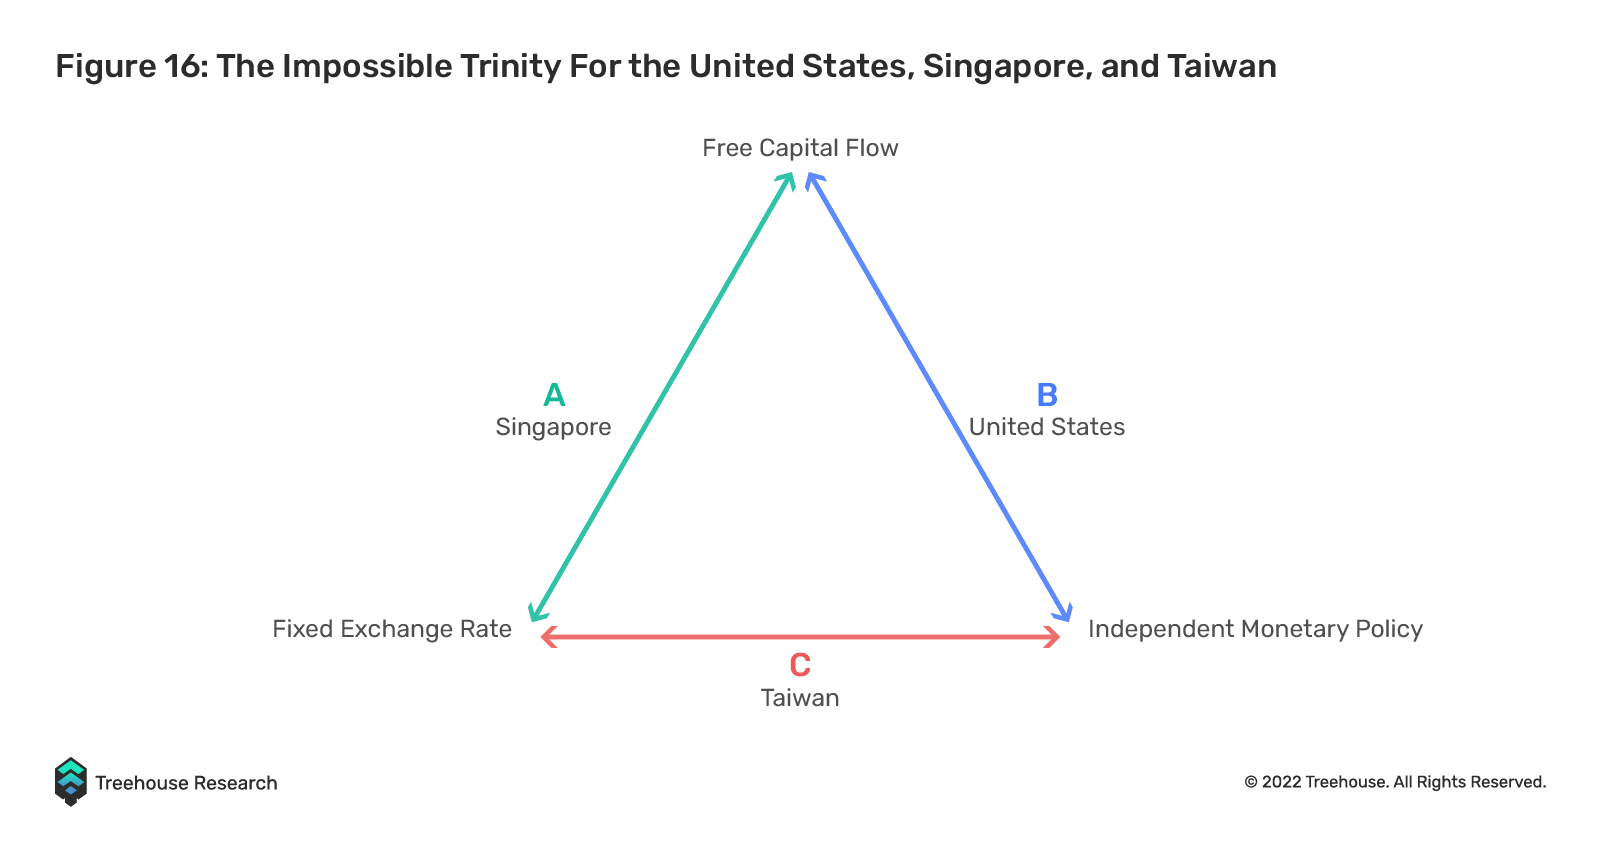 the impossible trinity for the united states, singapore, and taiwan